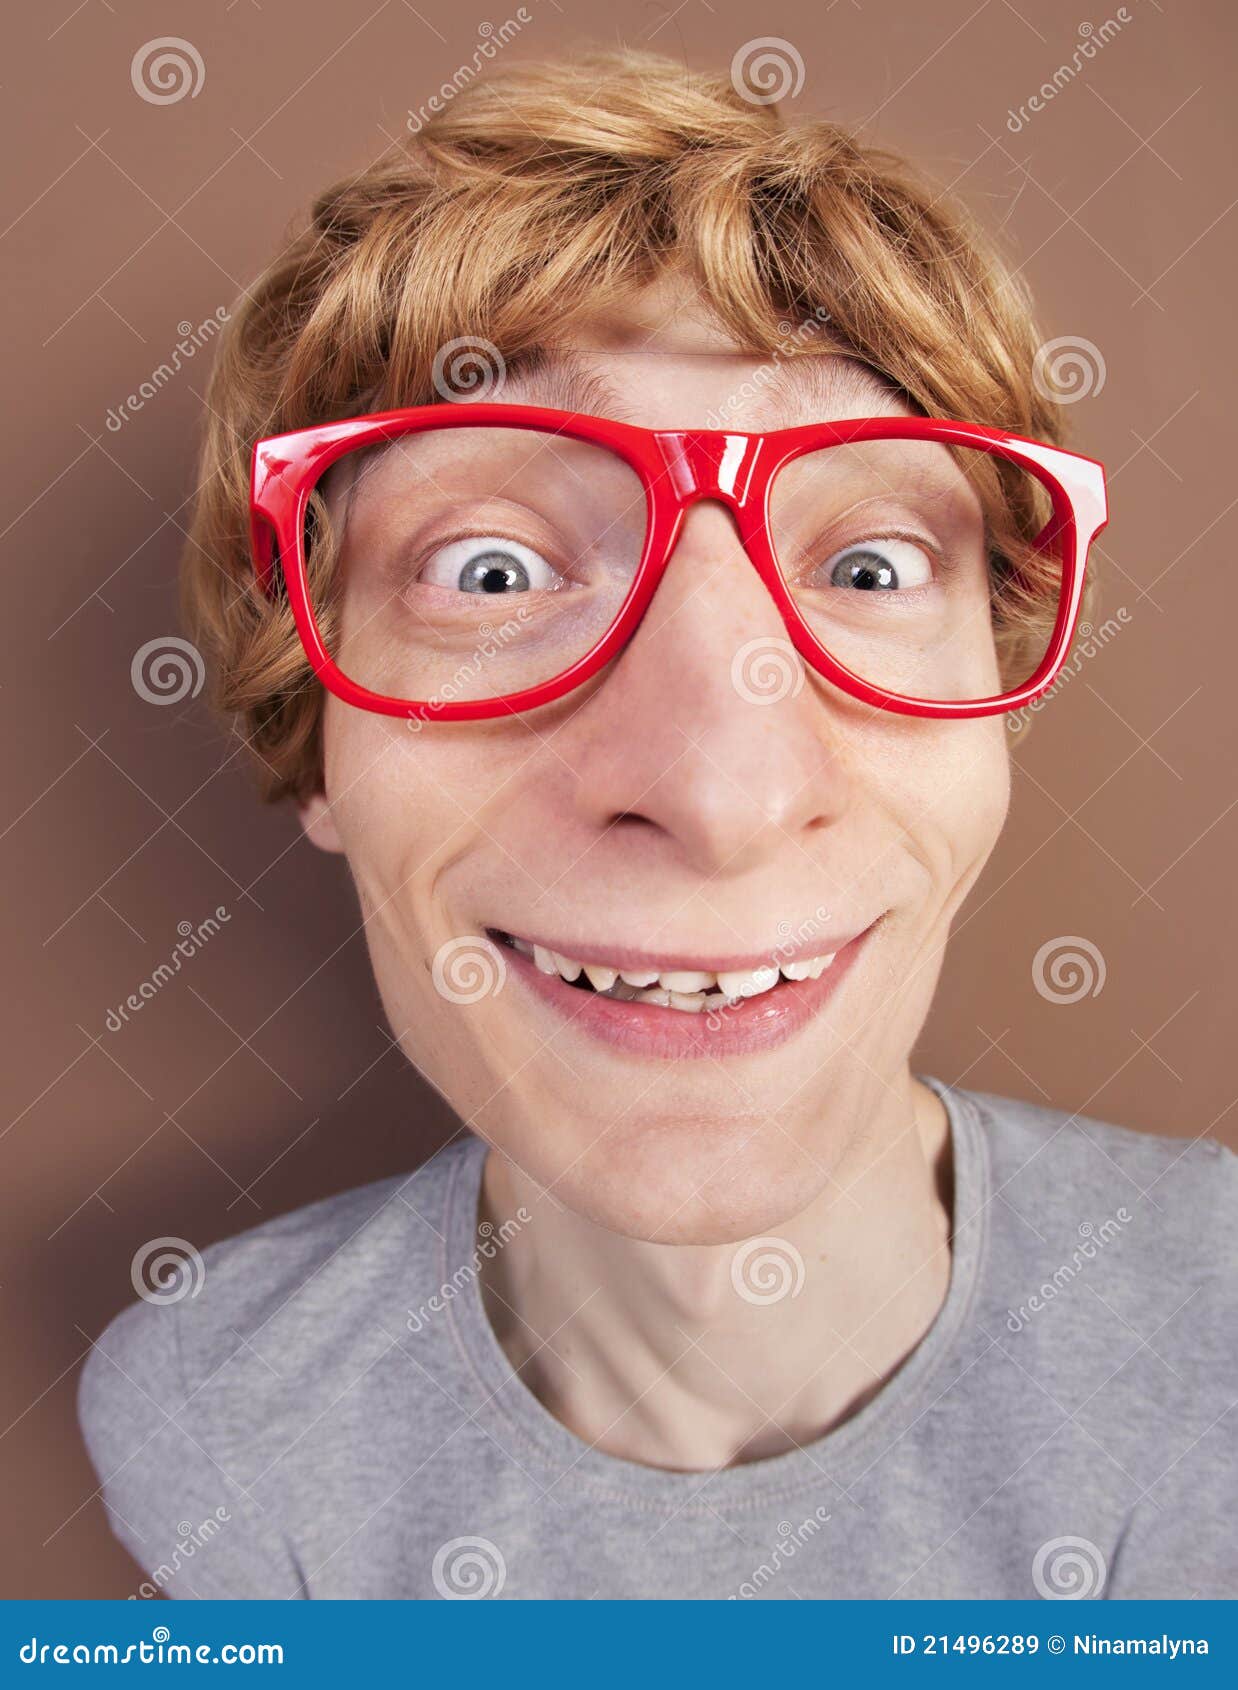 Funny nerdy guy stock image. Image of concept, fool, ginger - 21496289